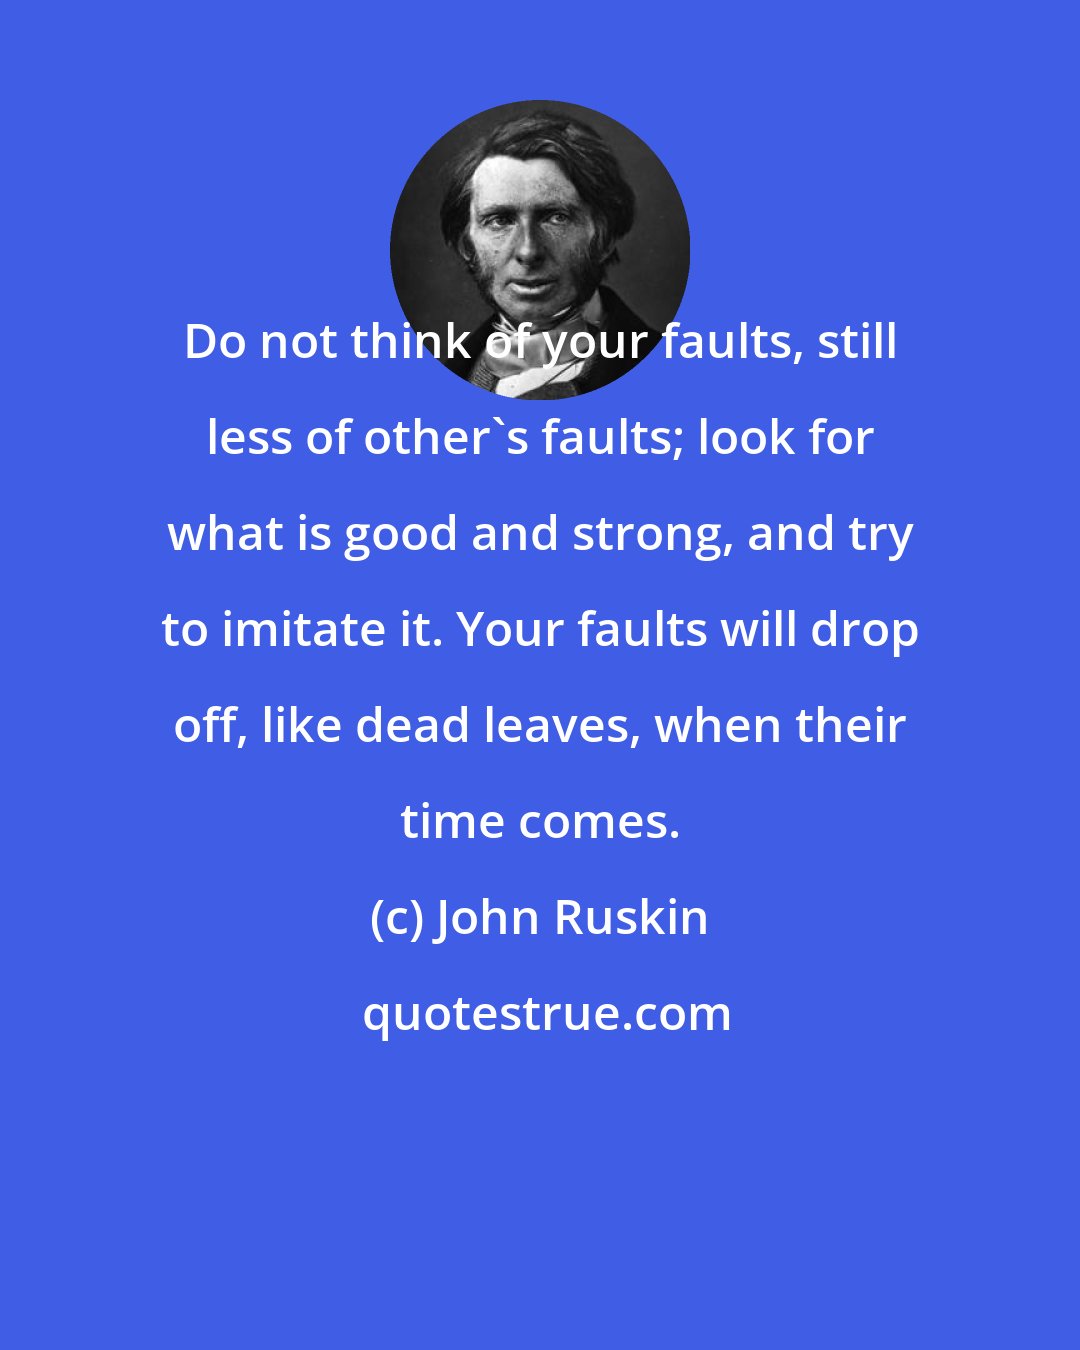 John Ruskin: Do not think of your faults, still less of other's faults; look for what is good and strong, and try to imitate it. Your faults will drop off, like dead leaves, when their time comes.